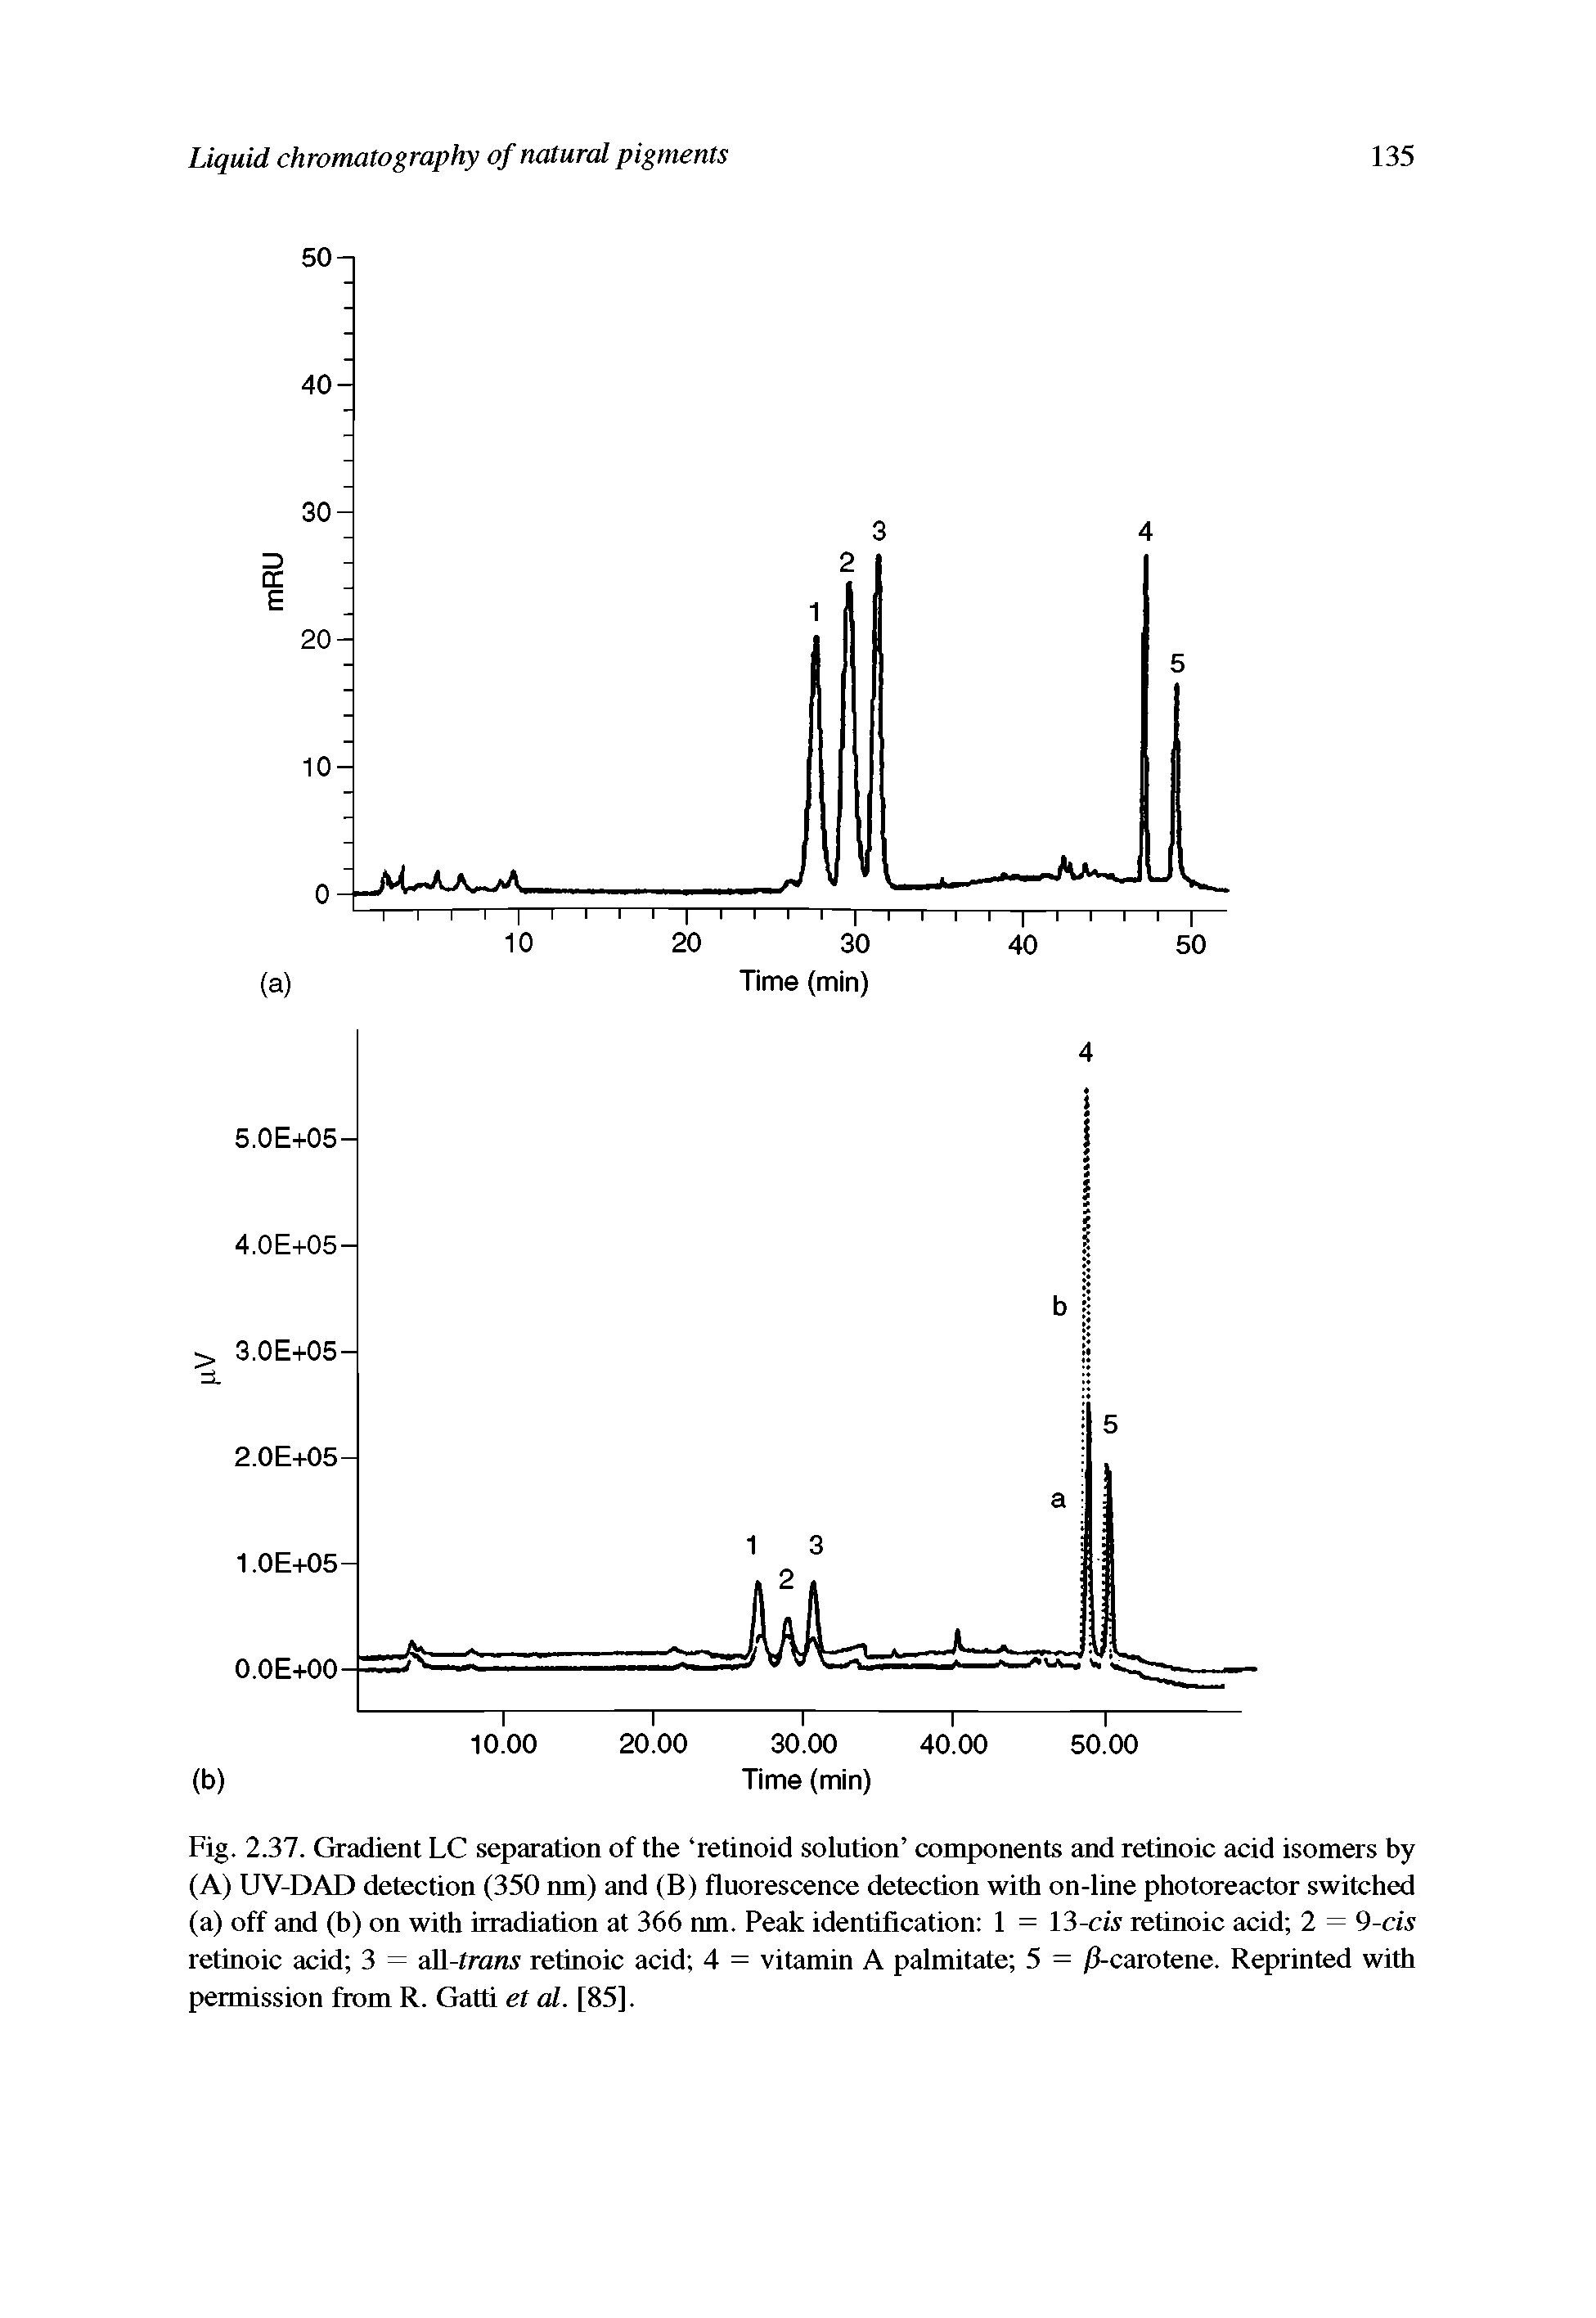 Fig. 2.37. Gradient LC separation of the retinoid solution components and retinoic acid isomers by (A) UV-DAD detection (350 nm) and (B) fluorescence detection with on-line photoreactor switched (a) off and (b) on with irradiation at 366 nm. Peak identification 1 = 13-civ retinoic acid 2 = 9-civ retinoic acid 3 = all-fraws retinoic acid 4 = vitamin A palmitate 5 = /1-carotene. Reprinted with permission from R. Gatti el al. [85].